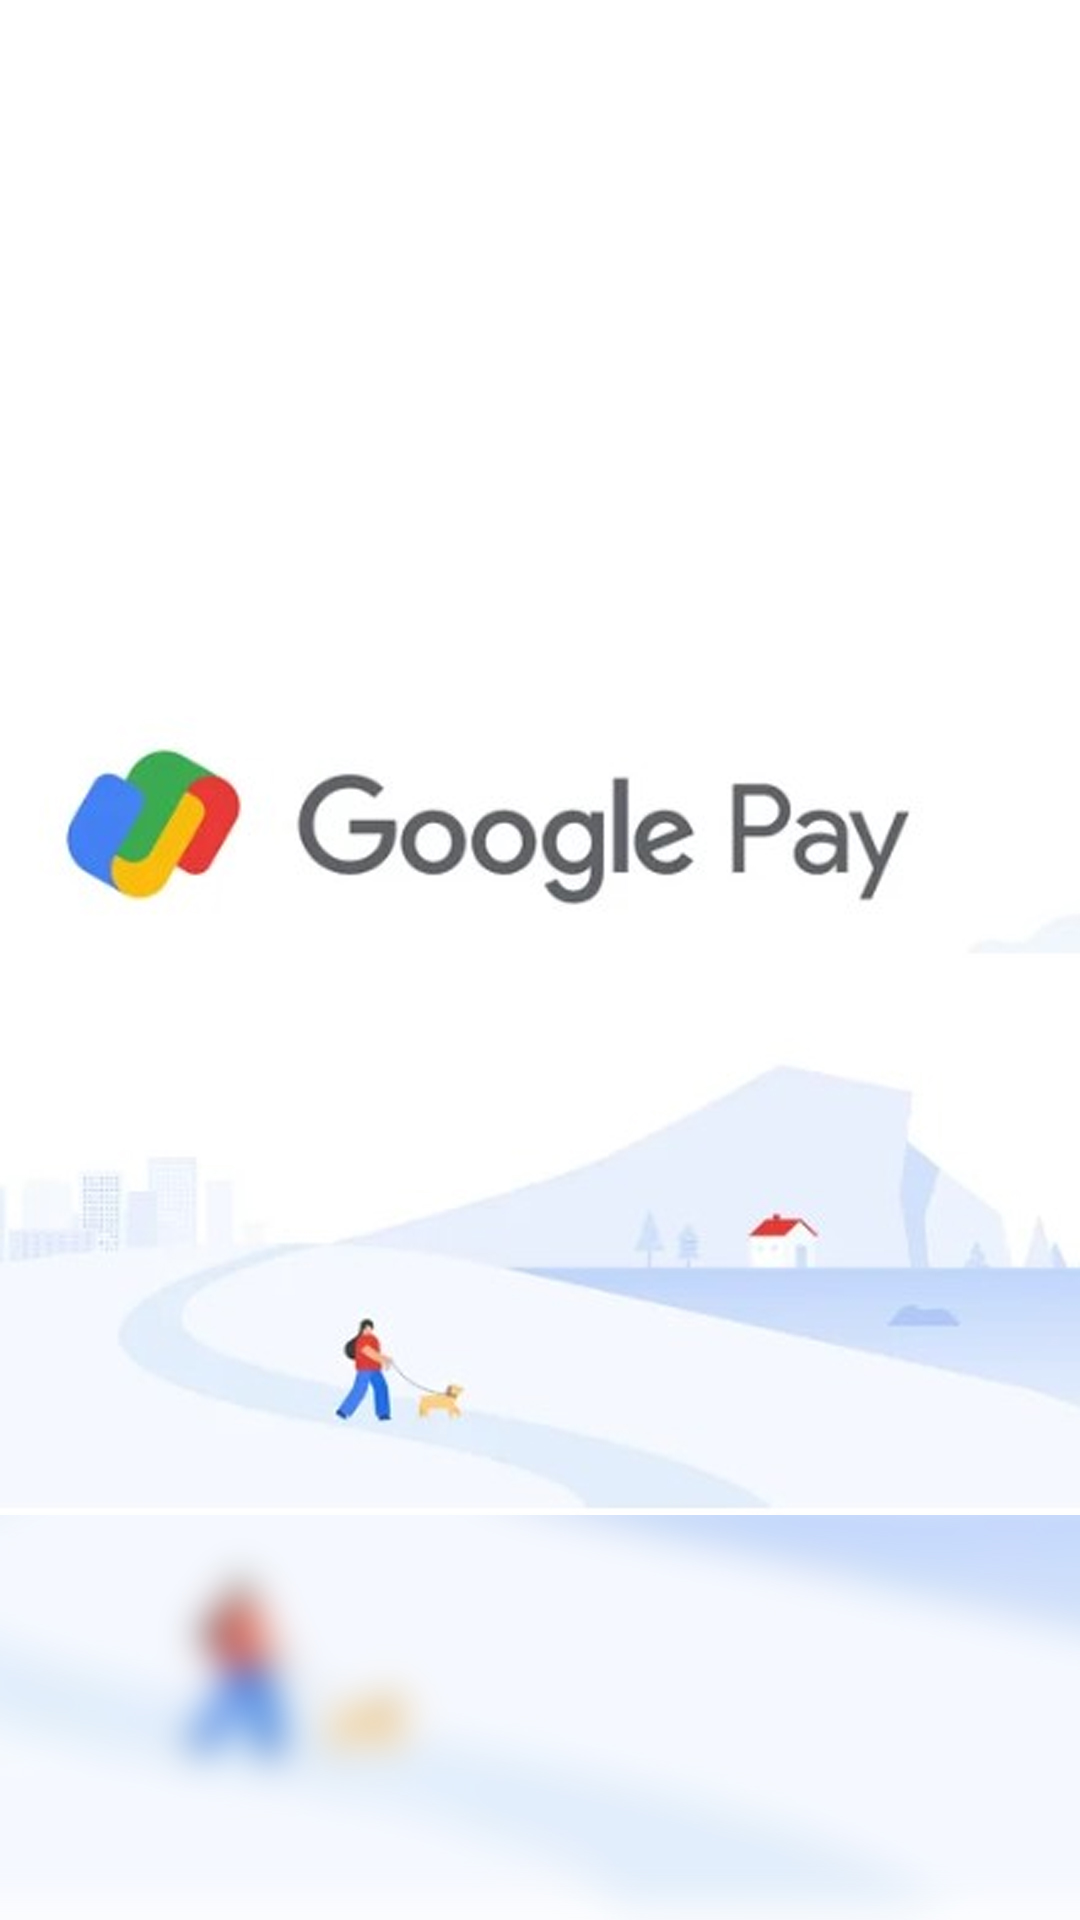 Learn how to split bills using Google Pay with this Step-by-step guide